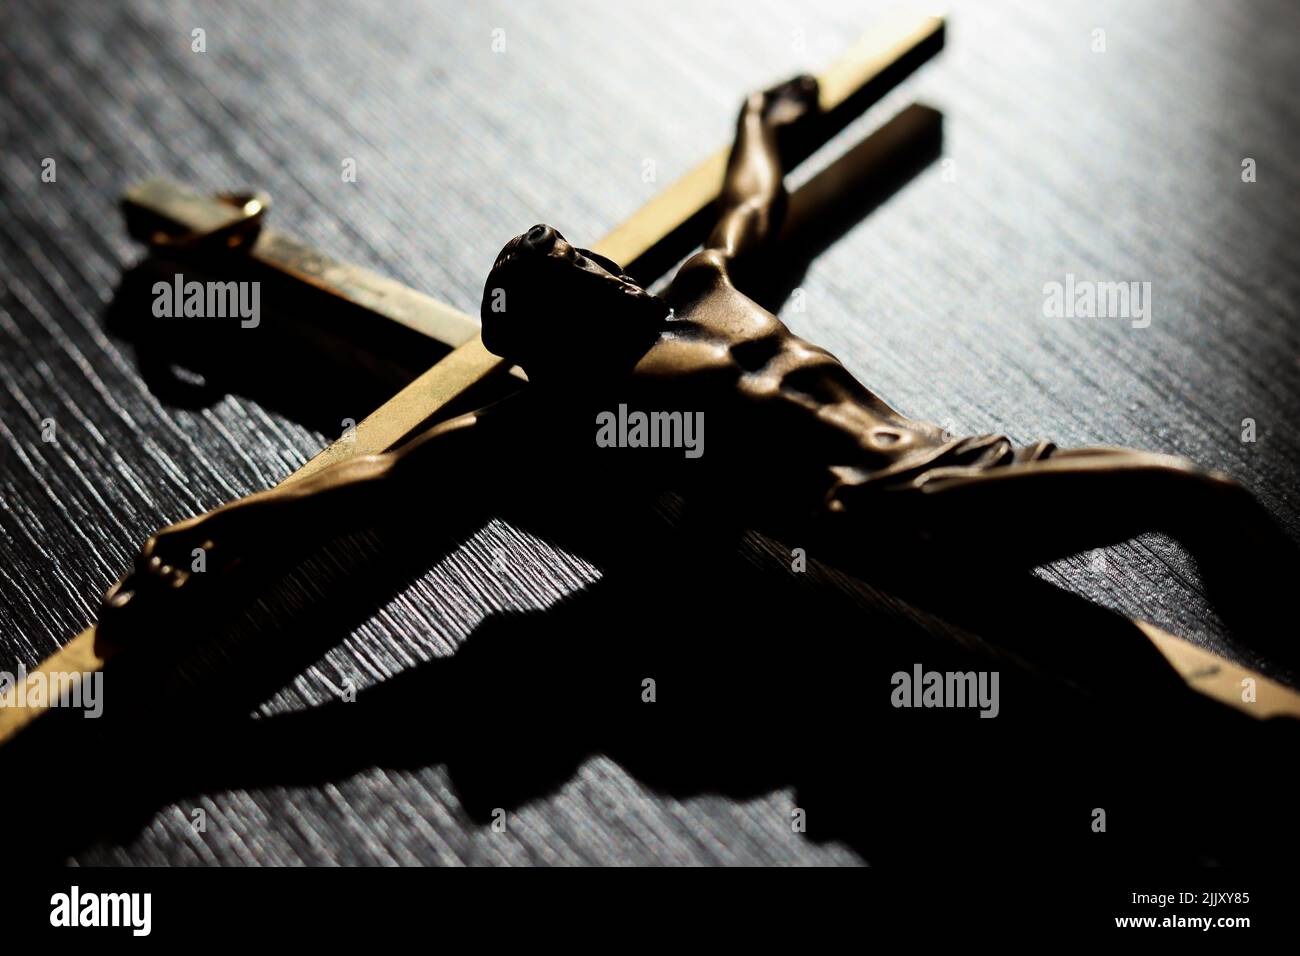 A closeup of Jesus on the cross figure on wooden table Stock Photo